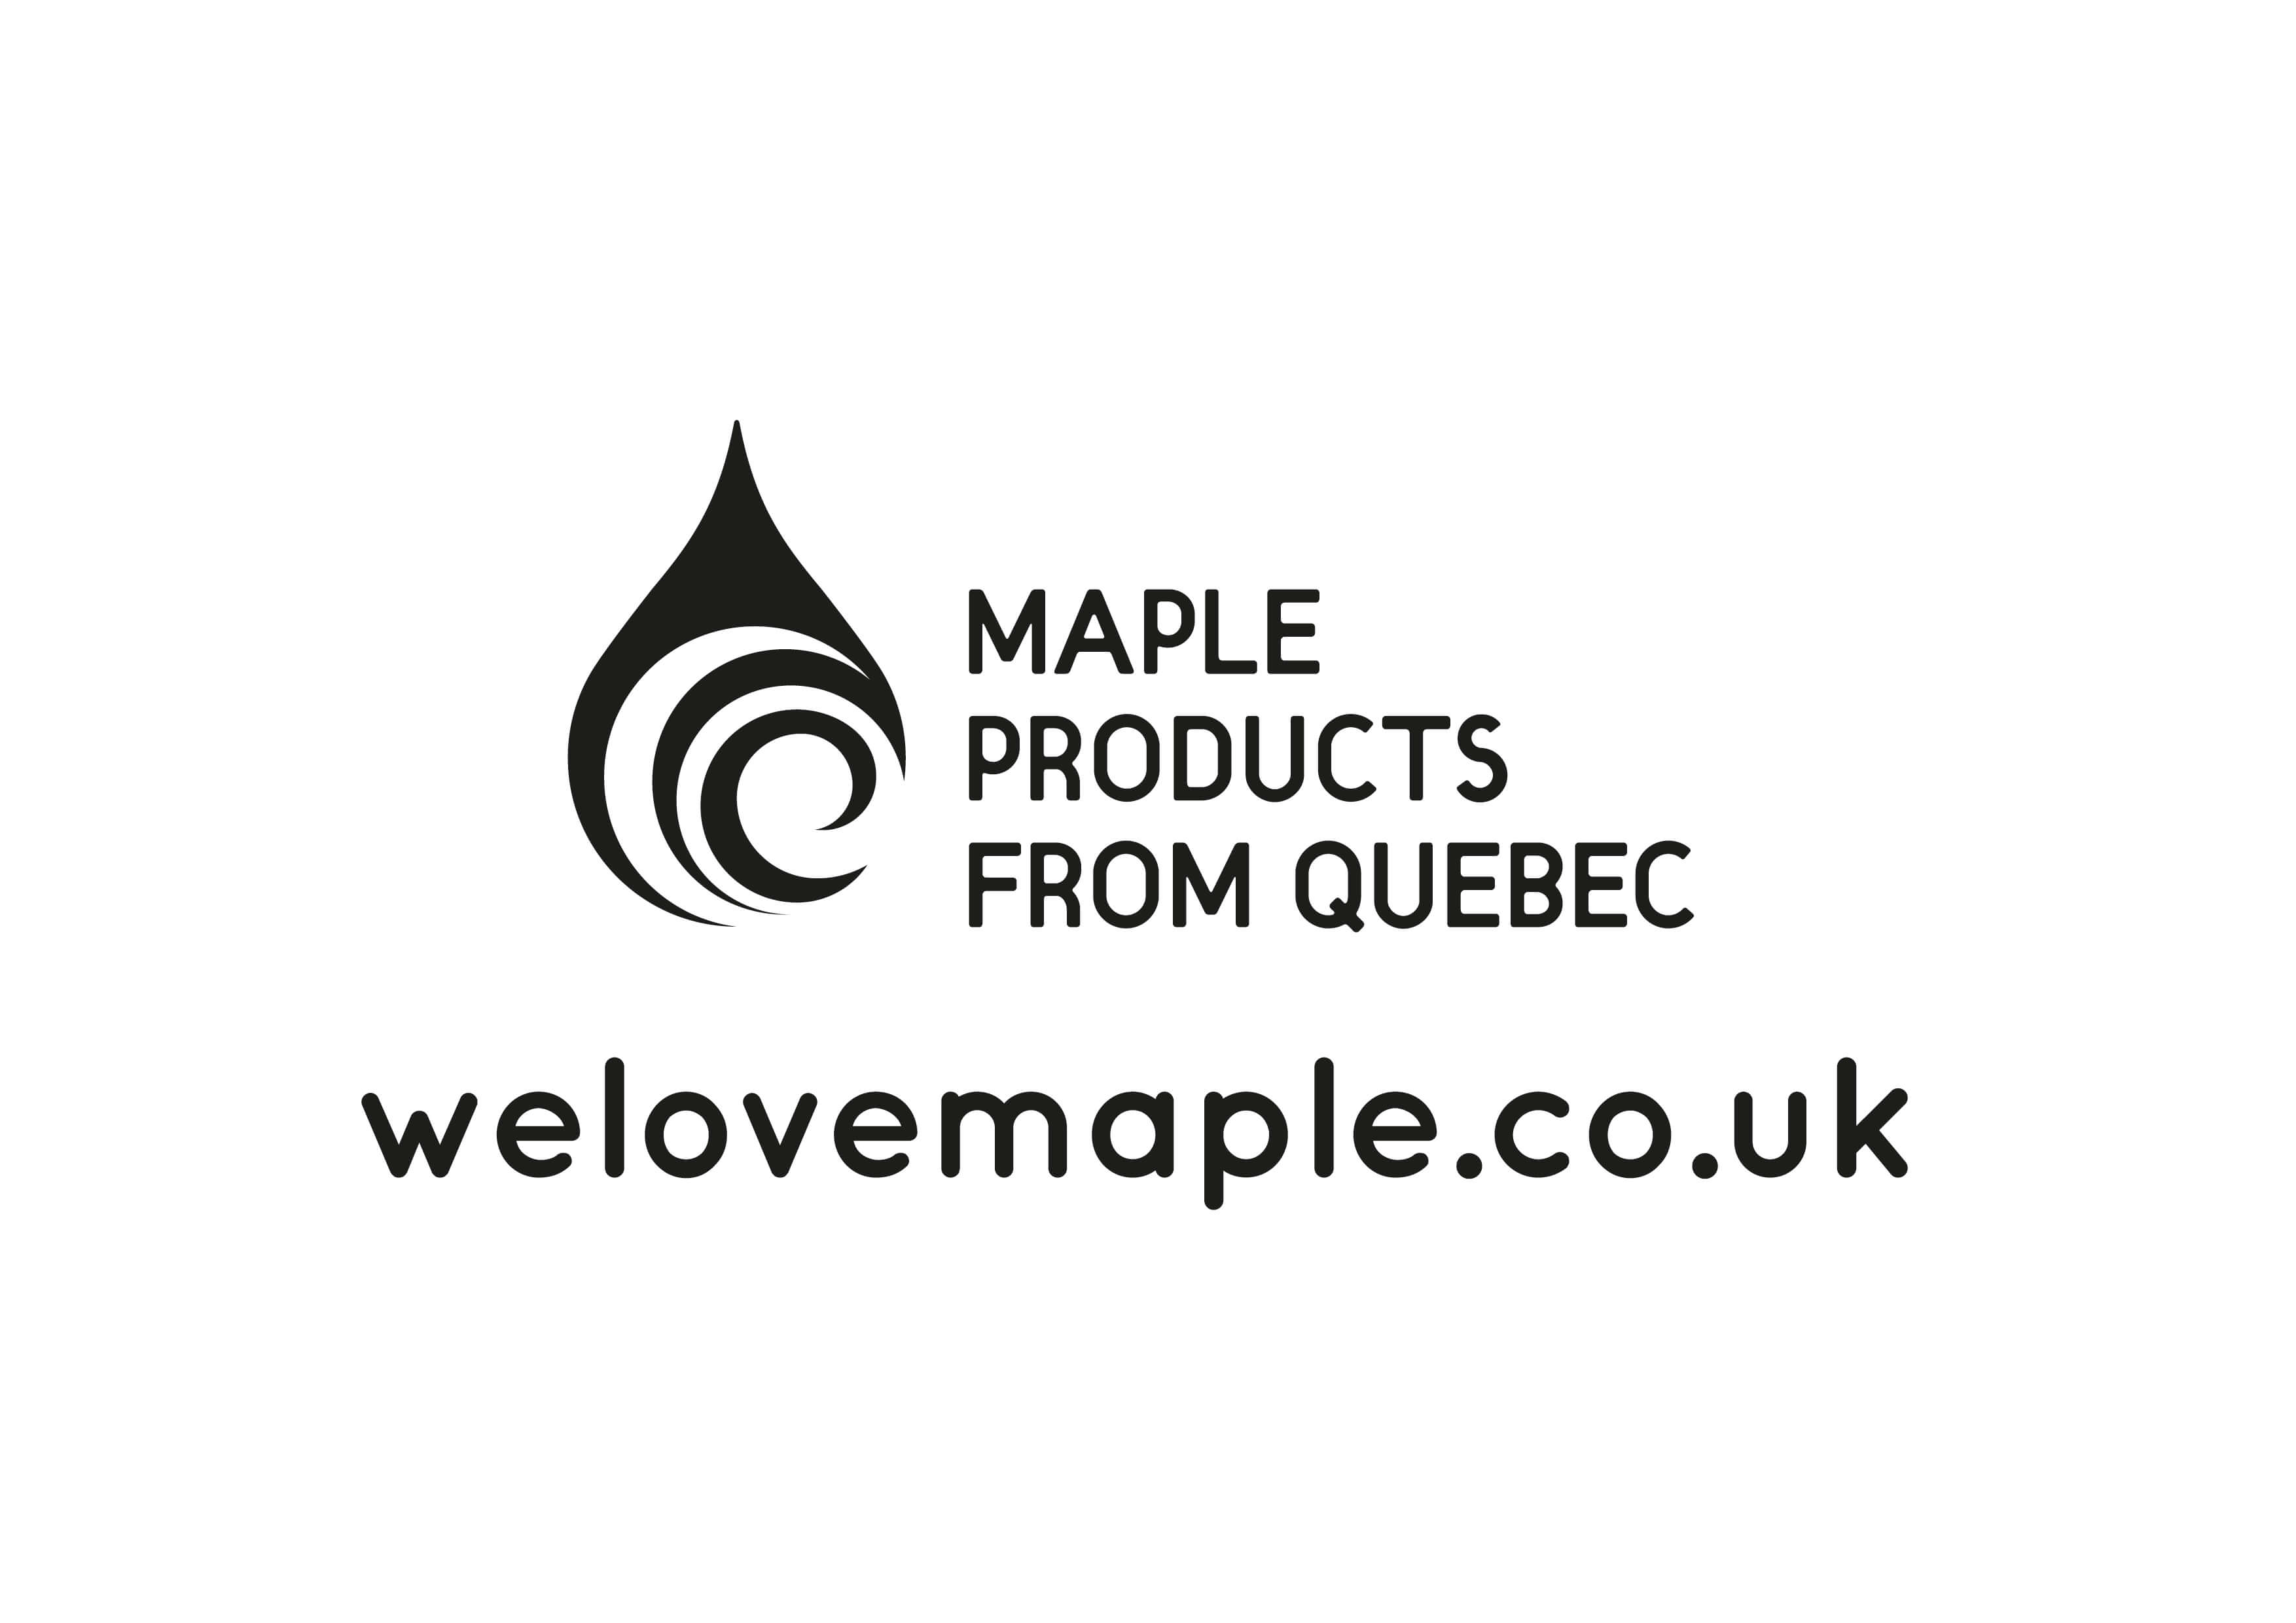 Maple products from Quebec logo